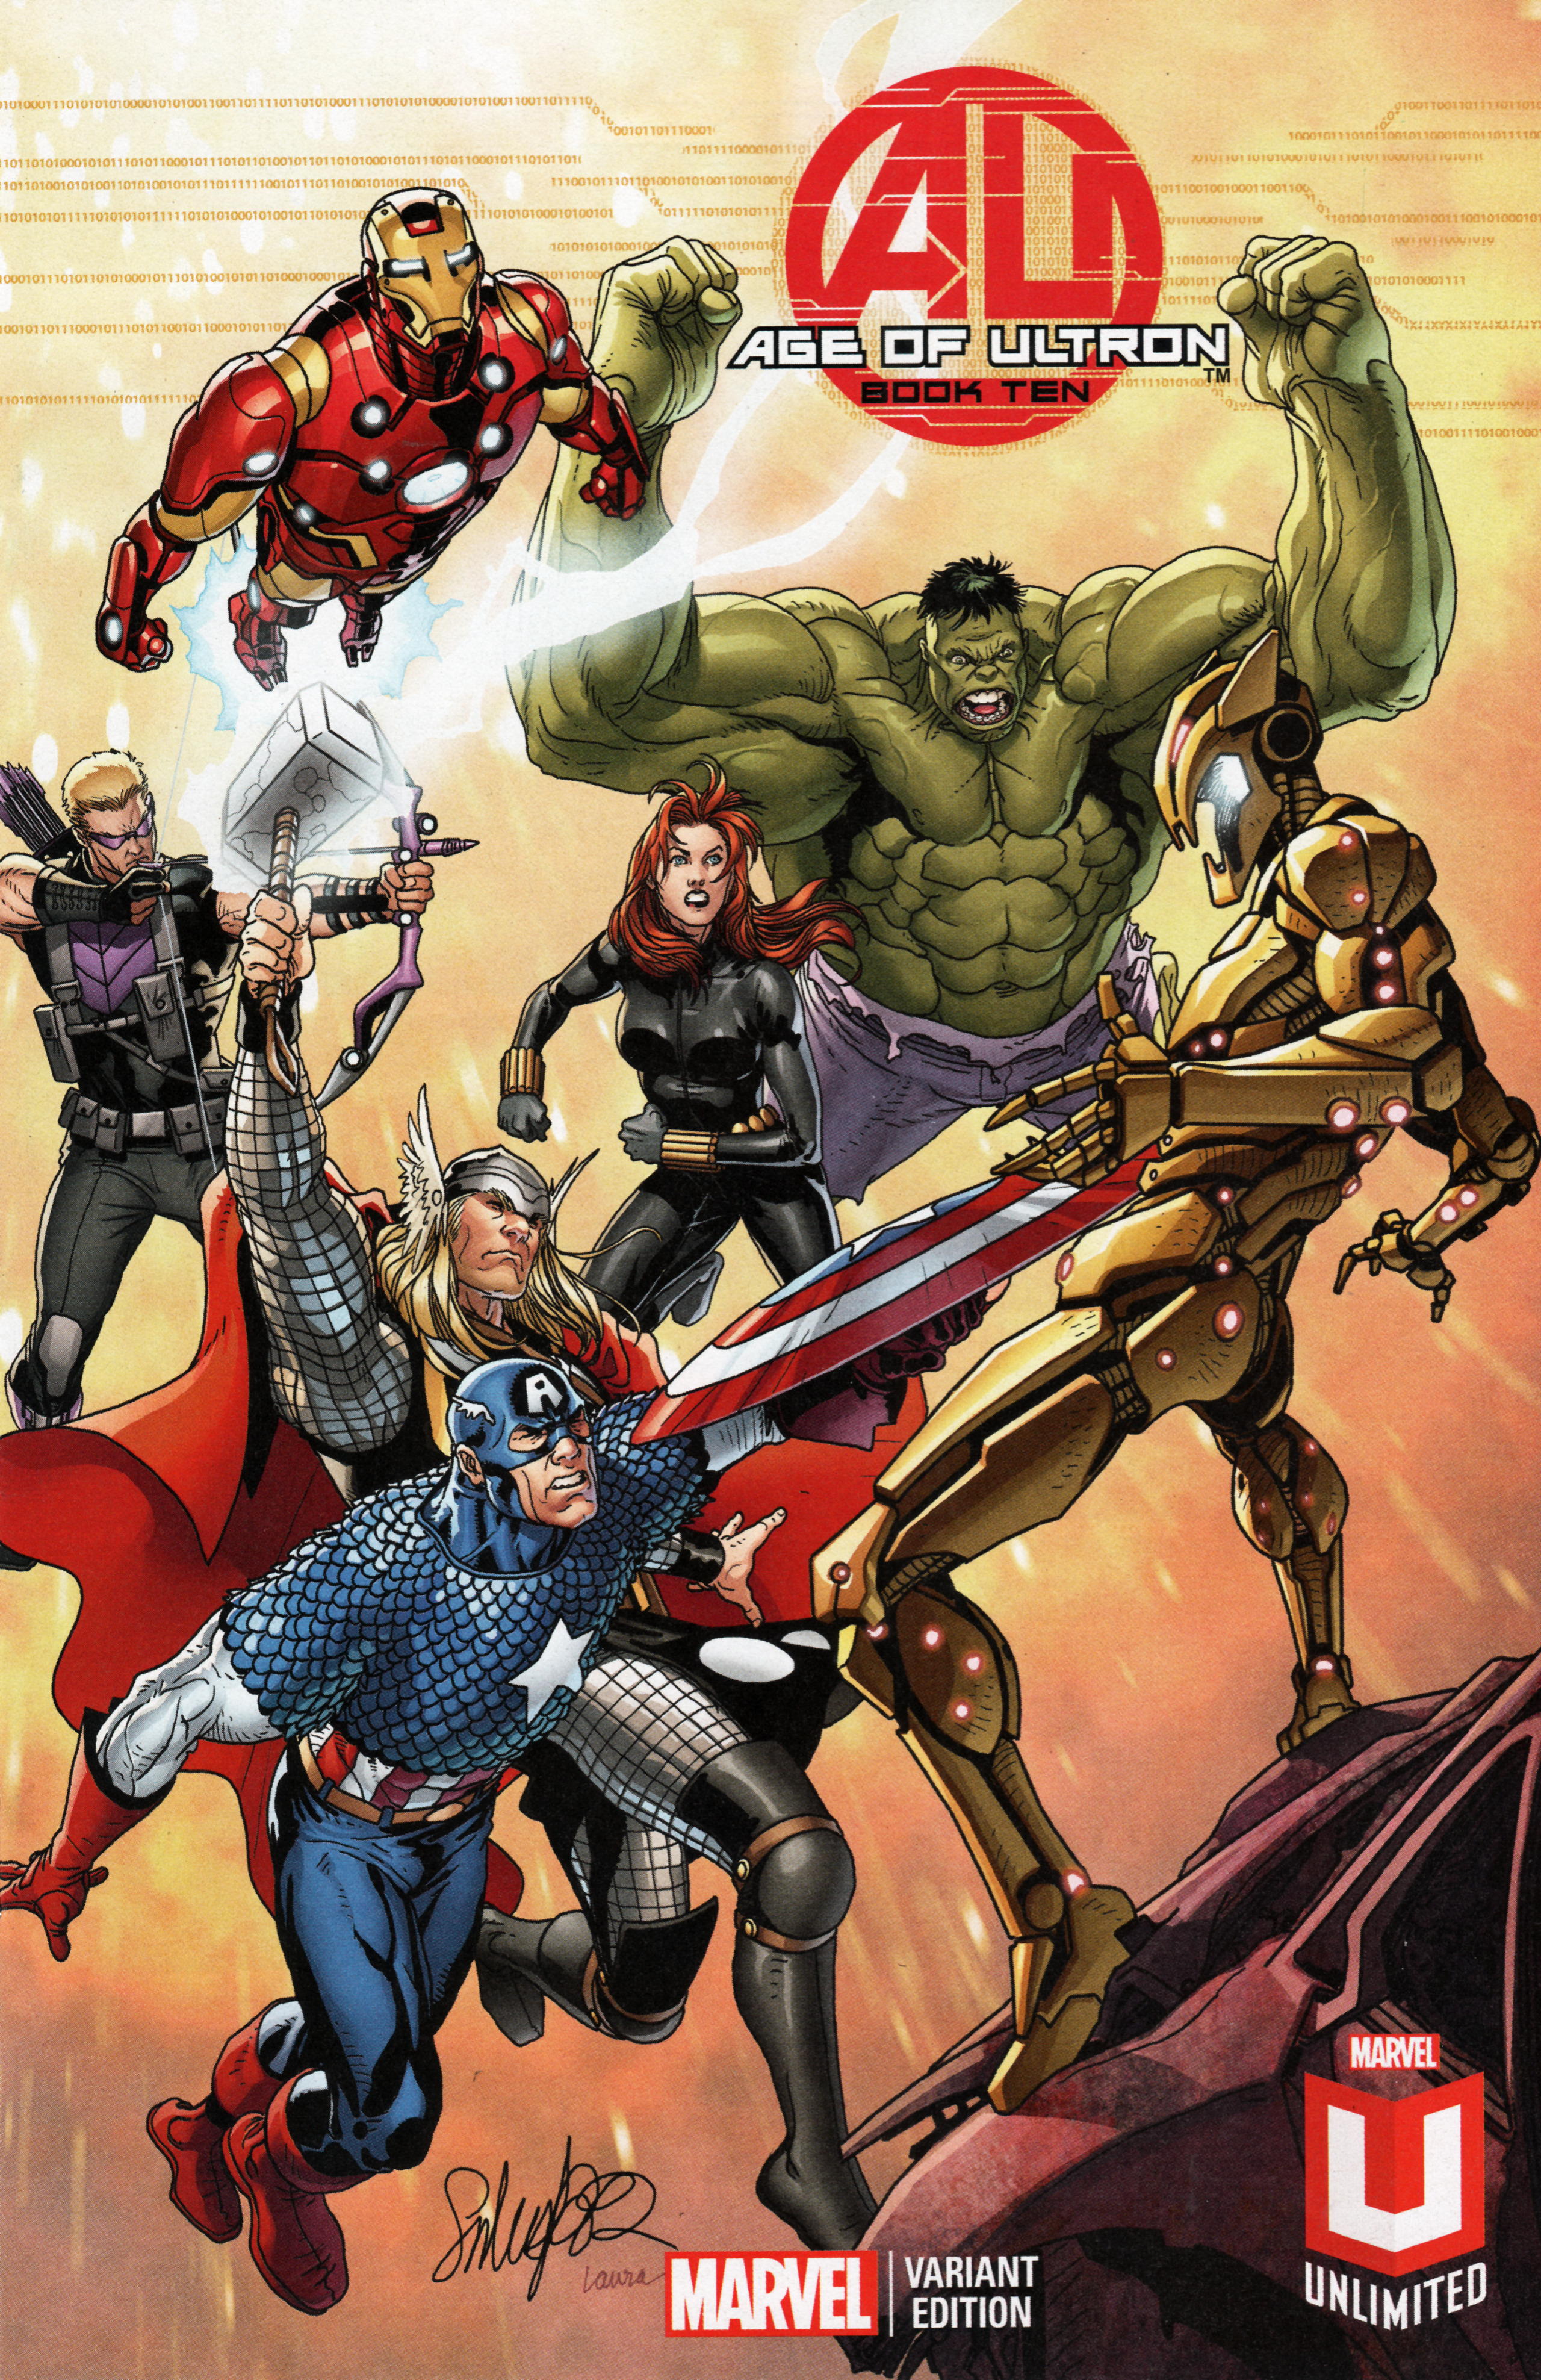 Age of Ultron Vol 1 10 Marvel Unlimited Subscription Variant